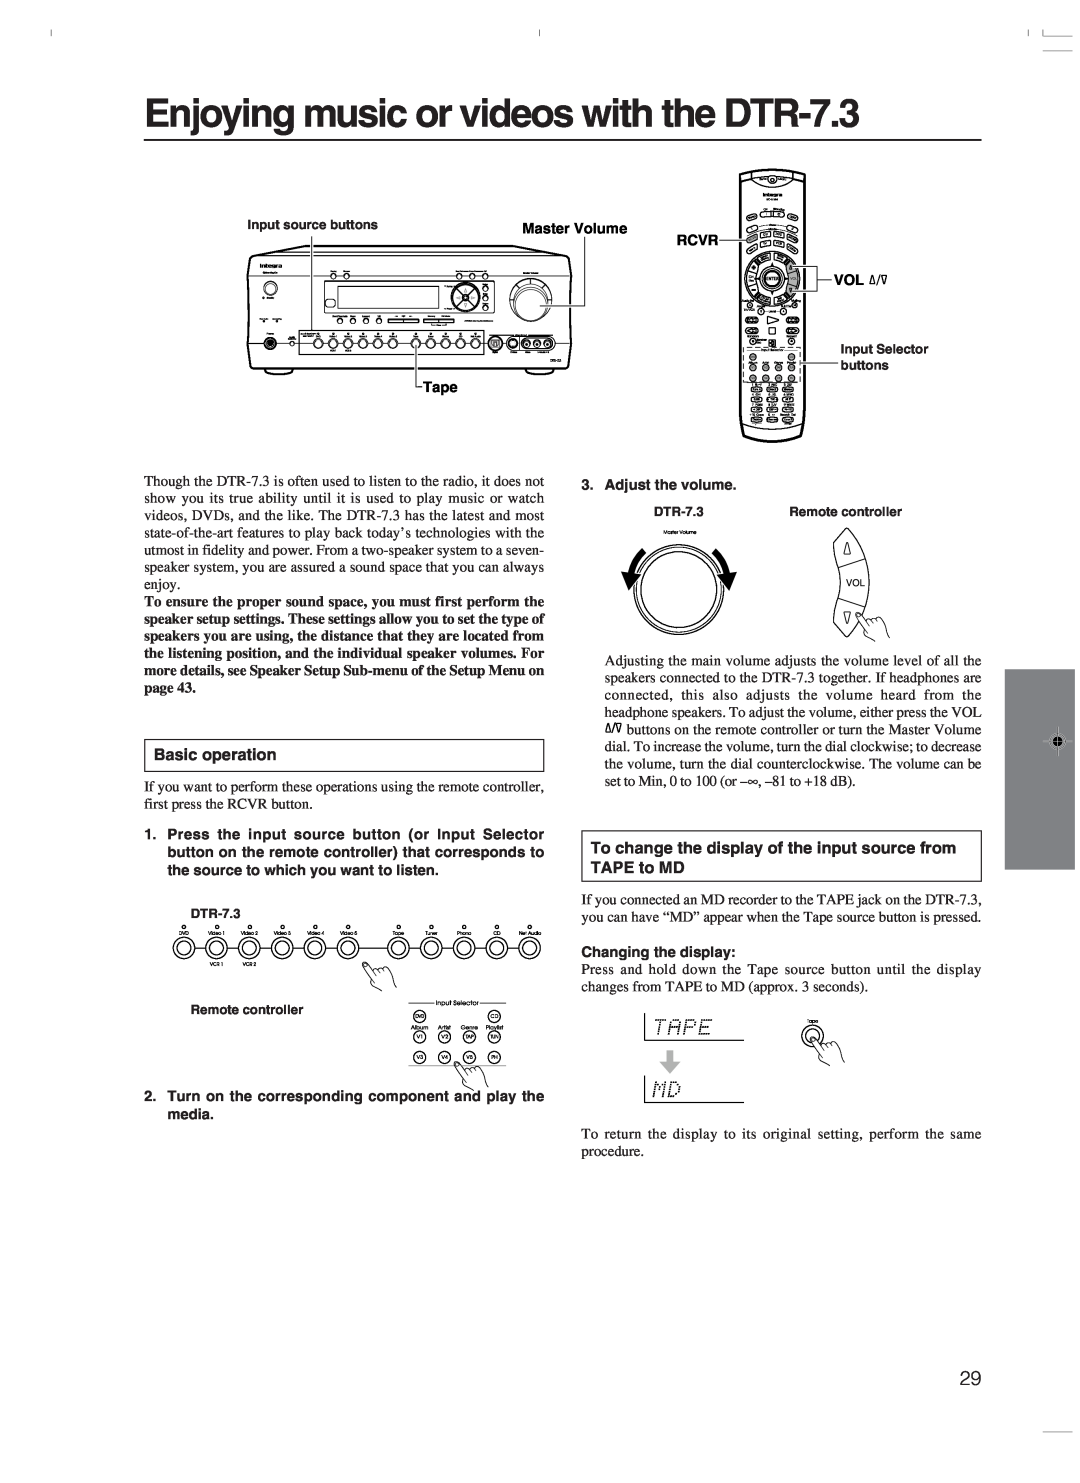 Integra instruction manual Enjoying music or videos with the DTR-7.3, Basic operation 